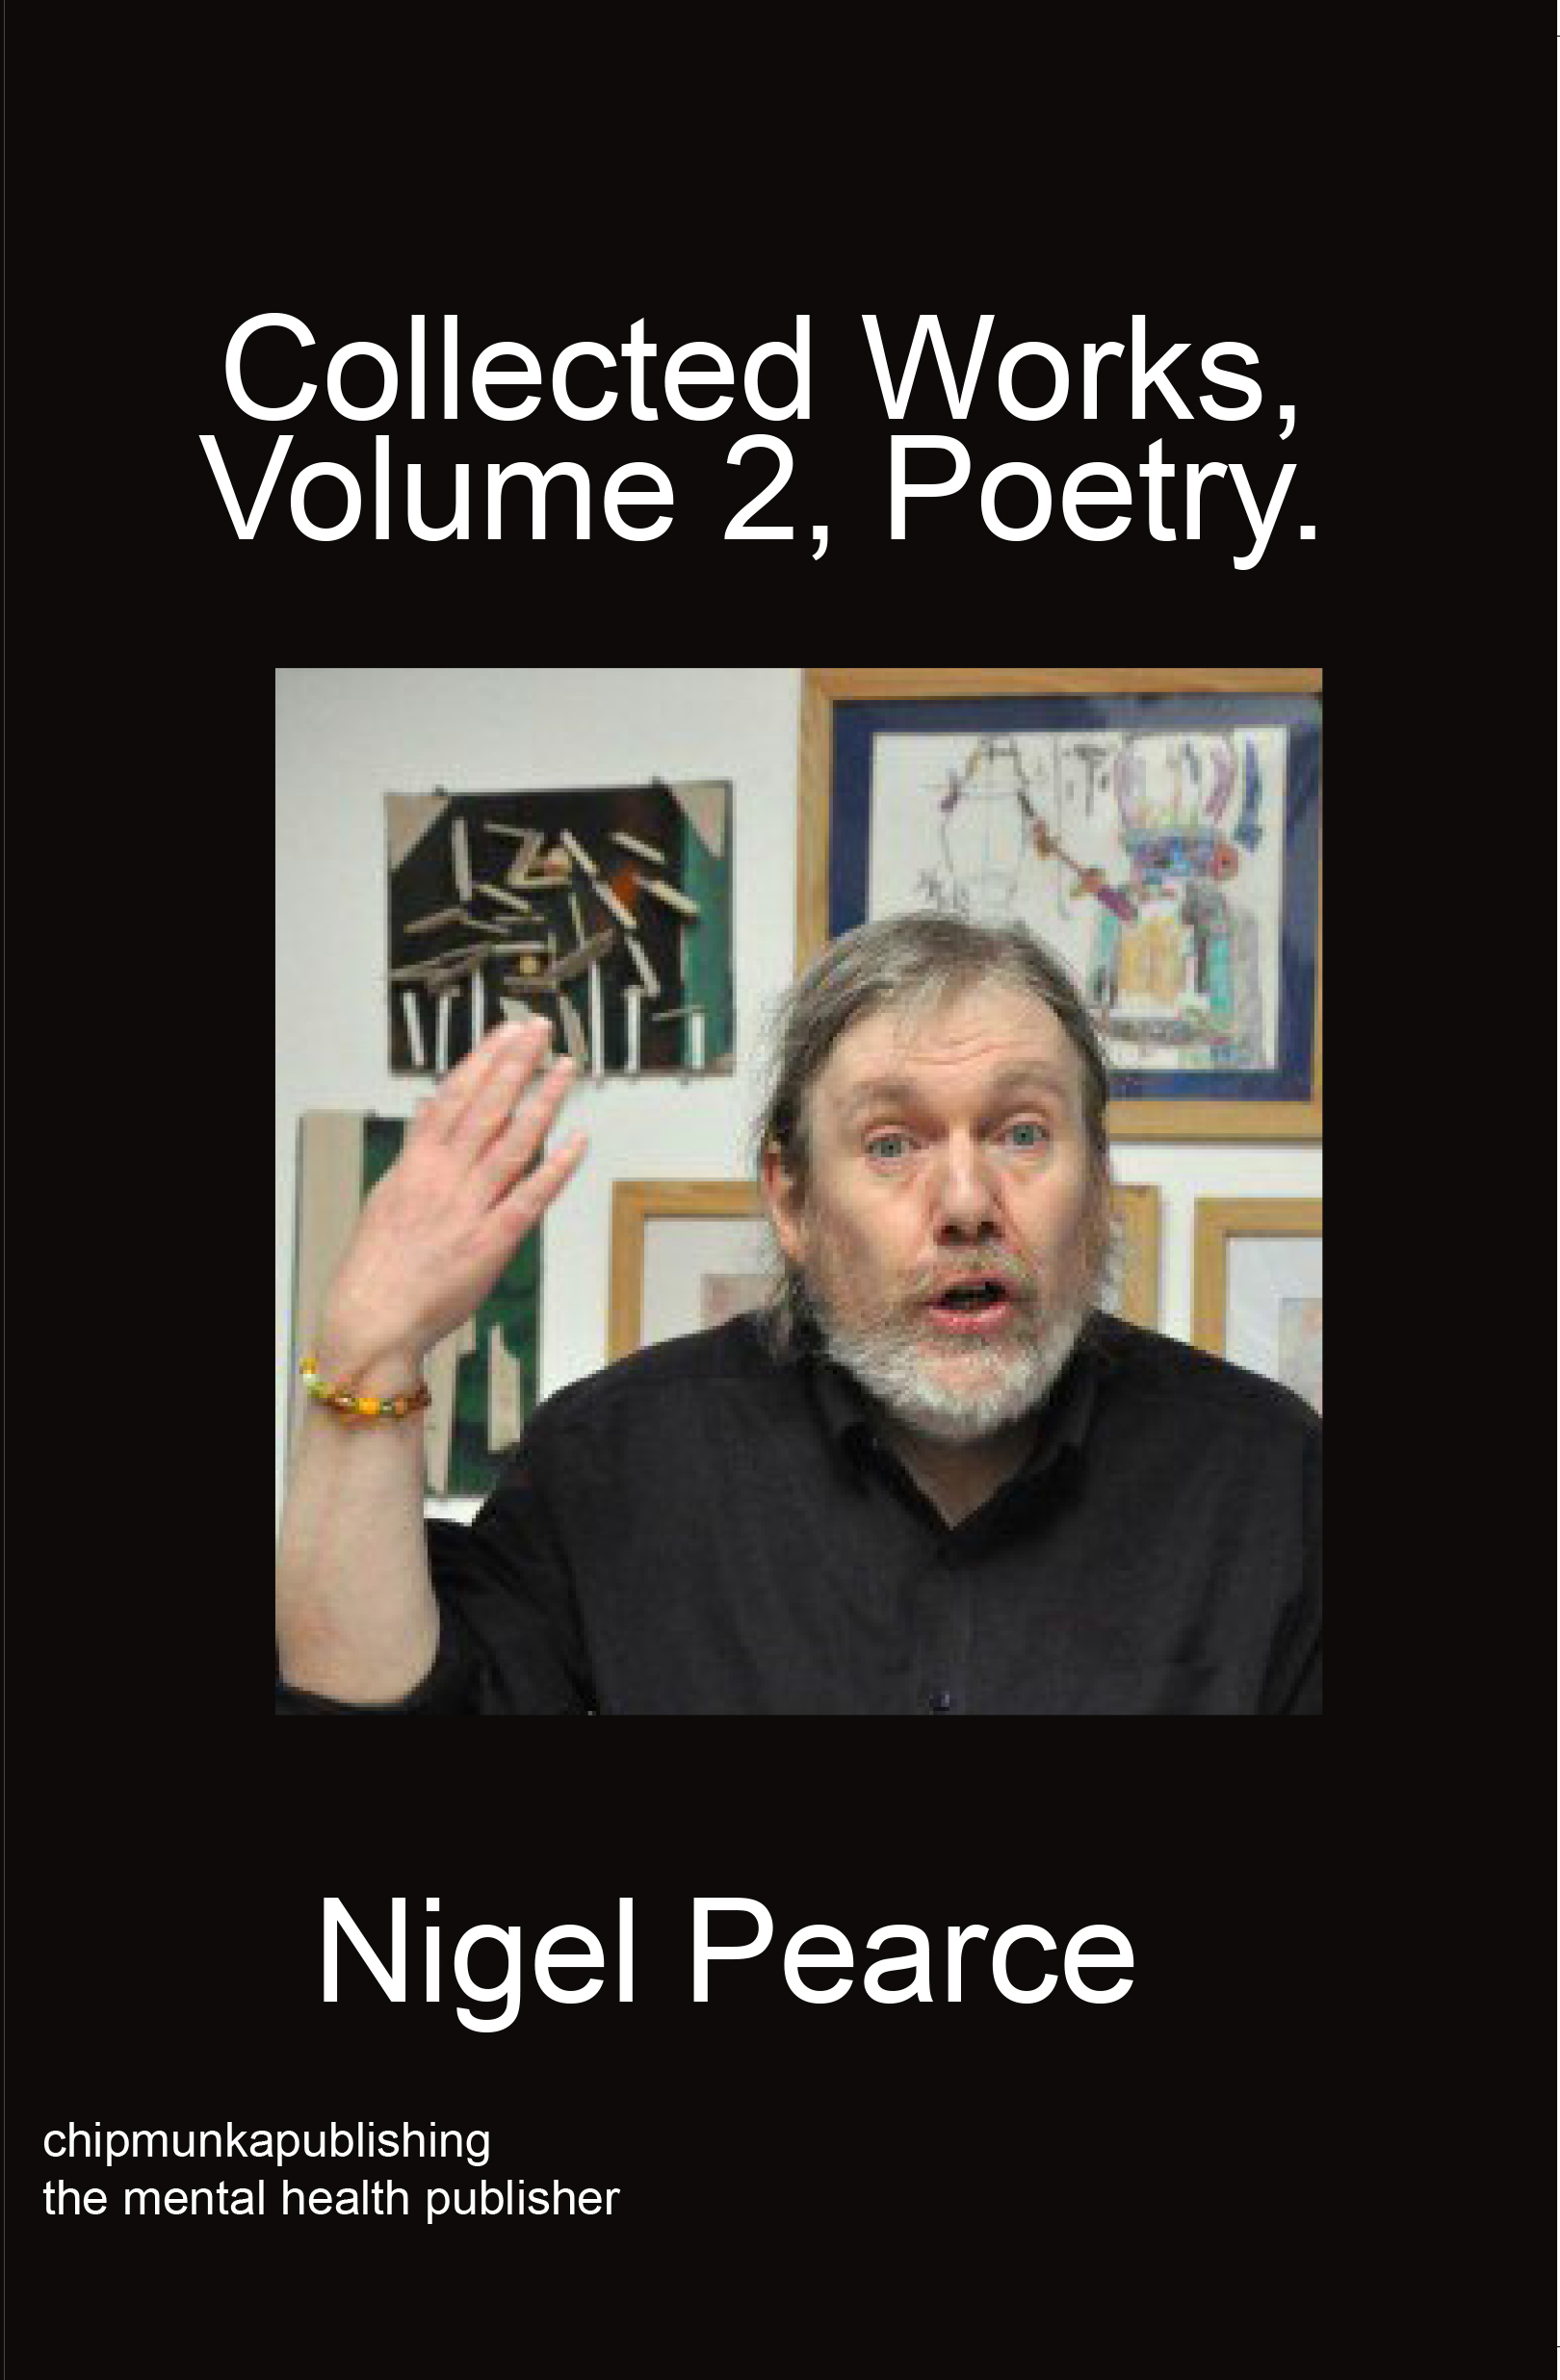 Collected Works, Volume 2, Poetry.